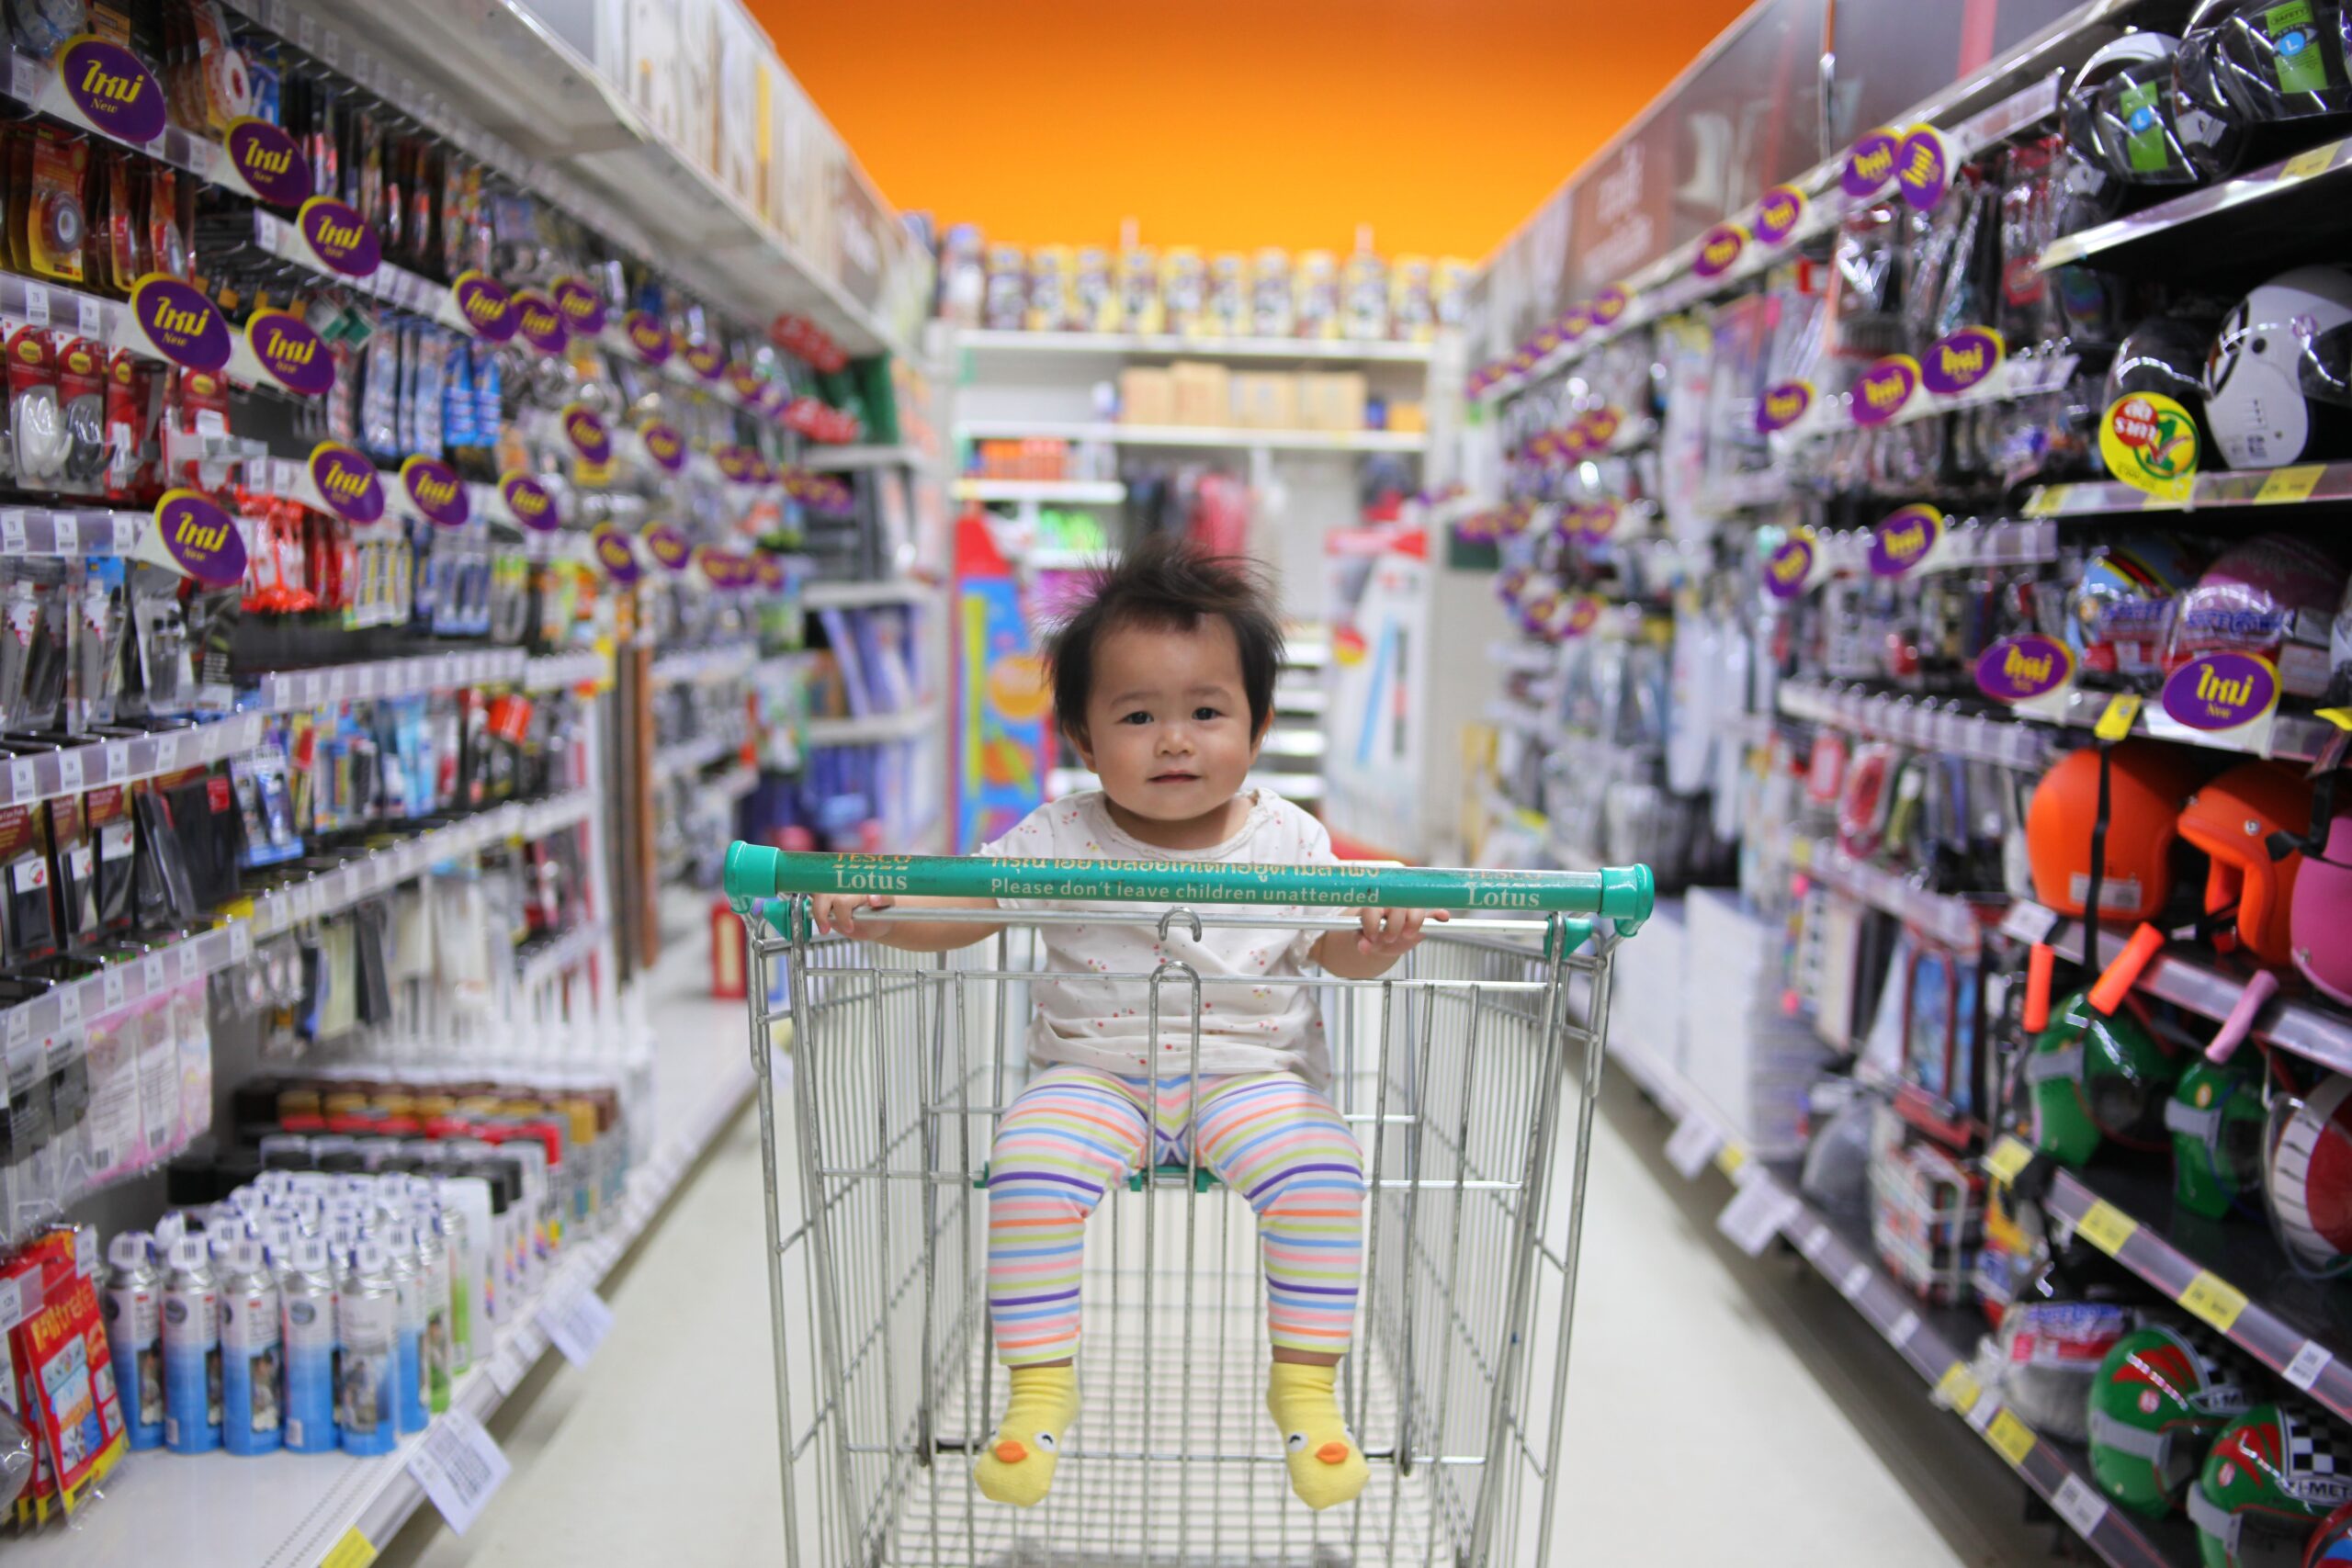 Baby-in-a-cart